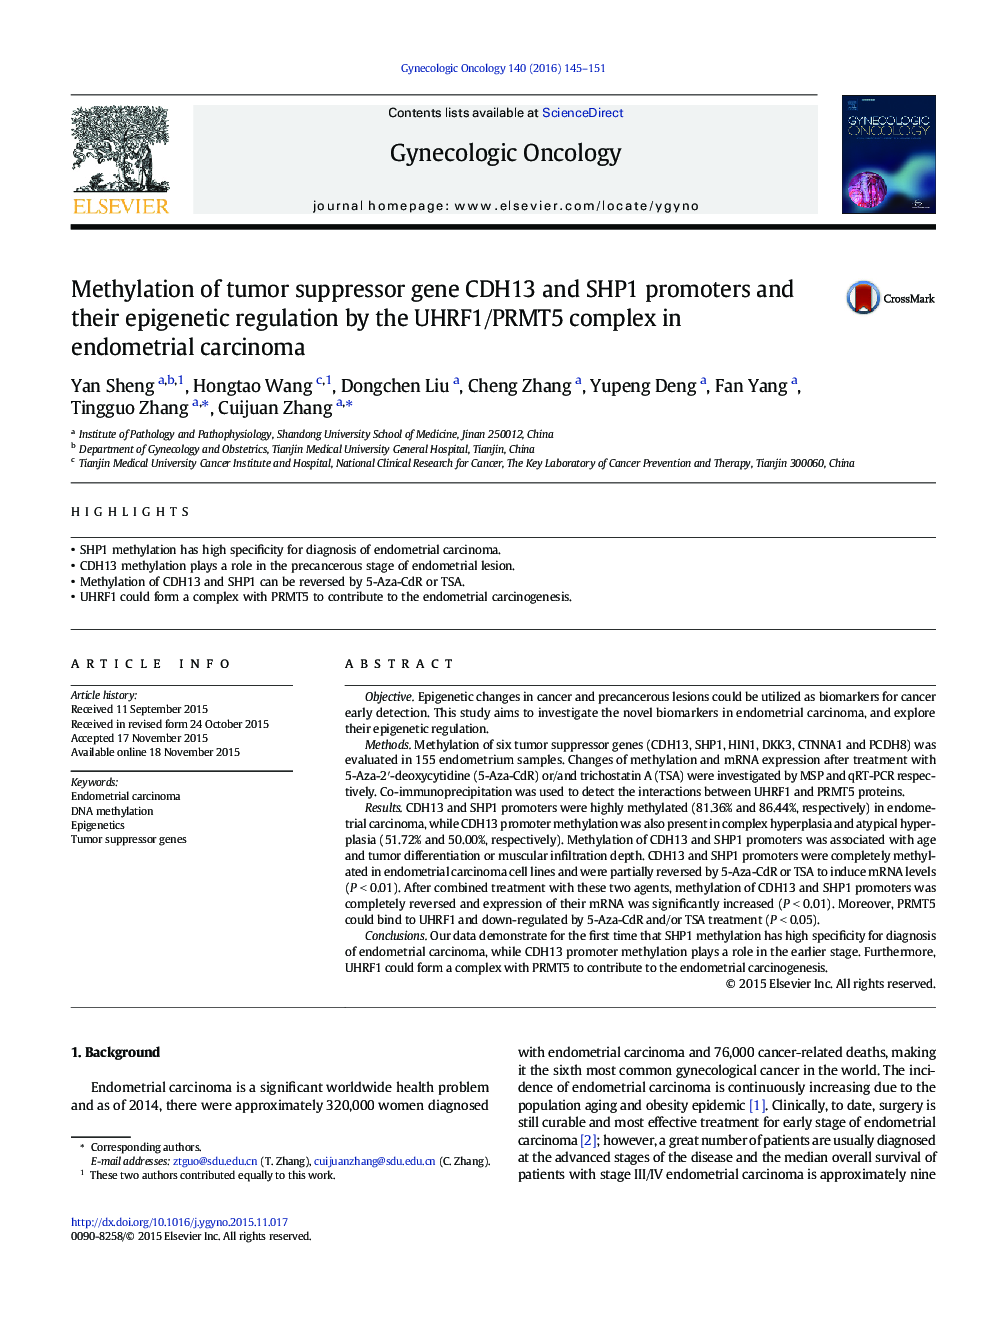 Methylation of tumor suppressor gene CDH13 and SHP1 promoters and their epigenetic regulation by the UHRF1/PRMT5 complex in endometrial carcinoma